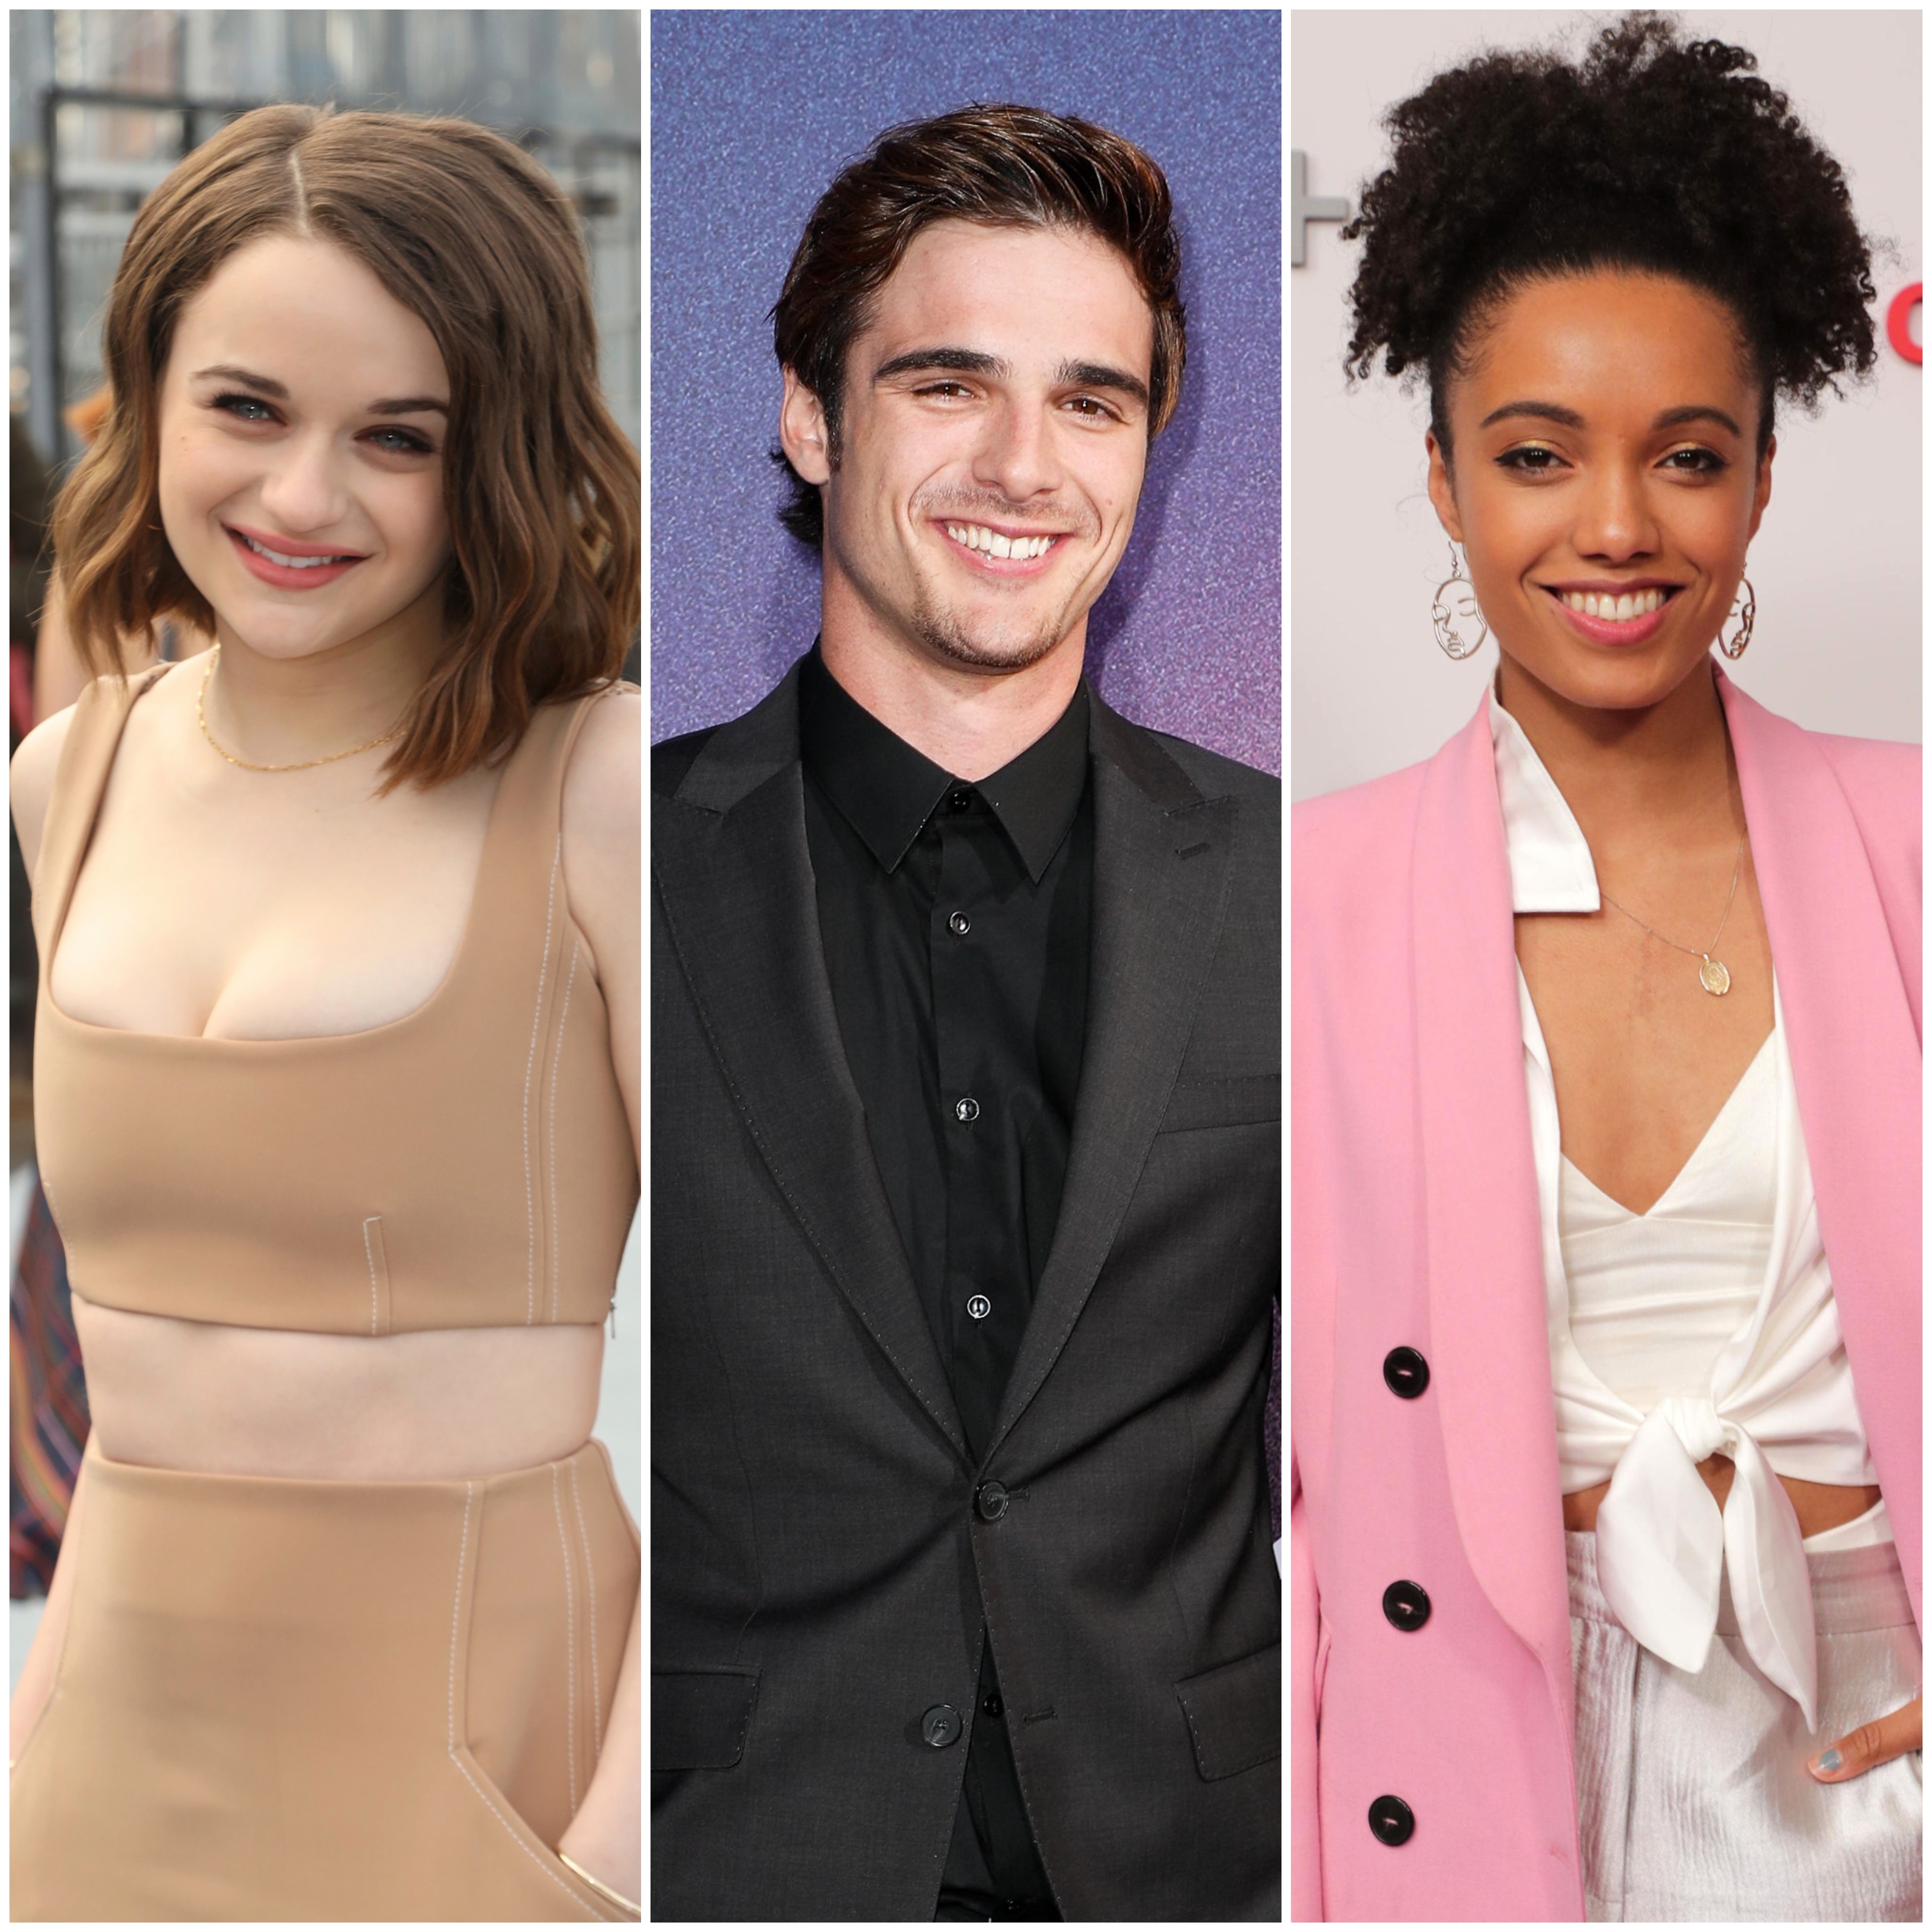 https://www.lifeandstylemag.com/wp-content/uploads/2020/07/Kissing-Booth-2%E2%80%99-Cast-Relationships_-Jacob-Elordi-Joey-King-and-More.jpg?quality=86&strip=all